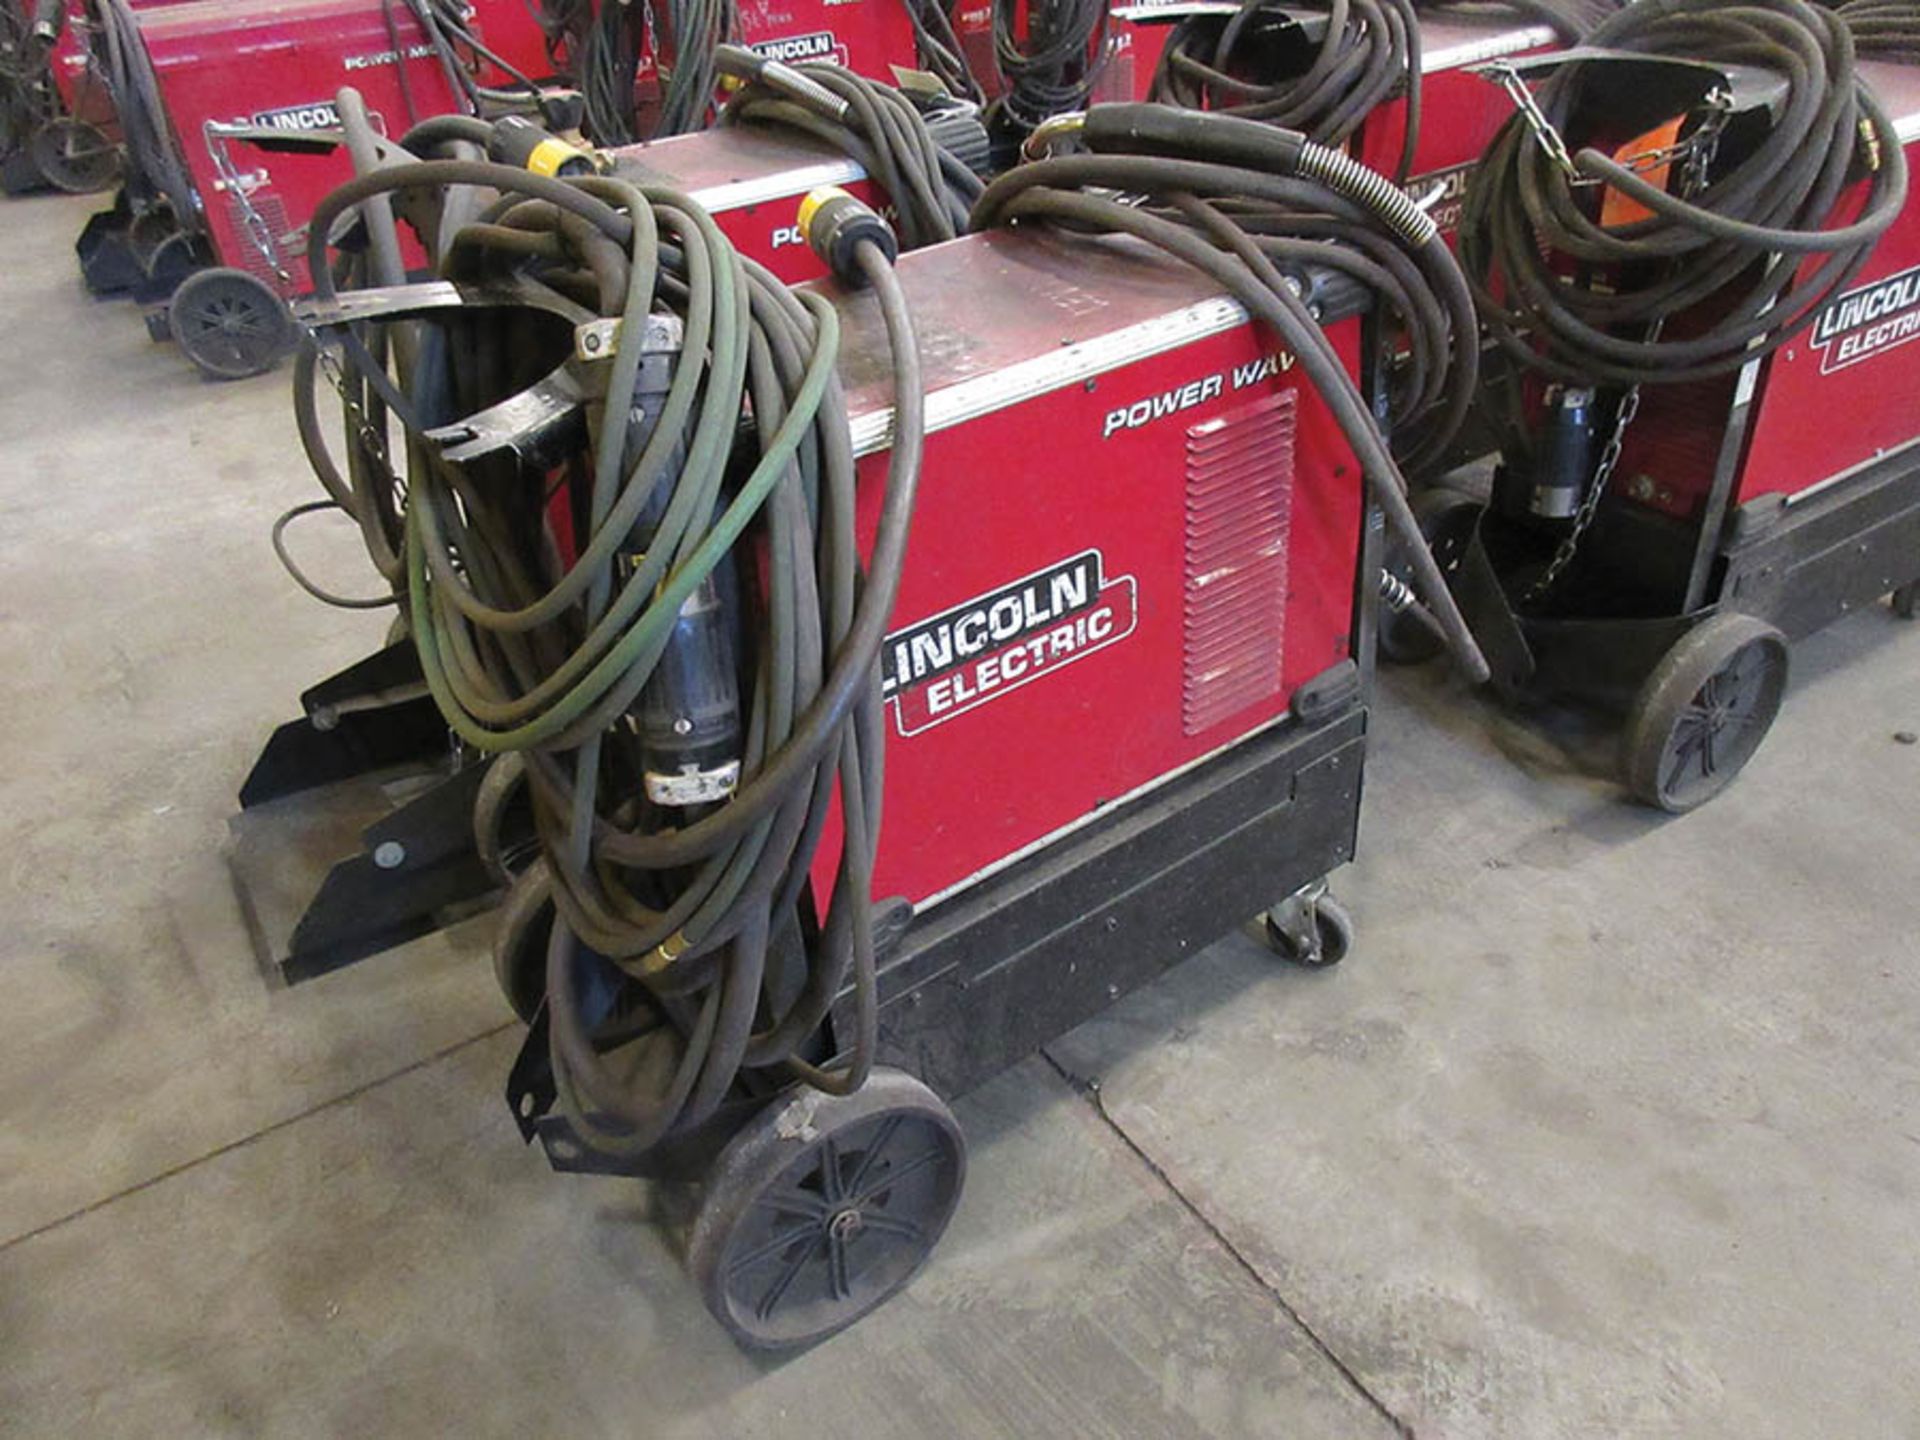 LINCOLN ELECTRIC C300 POWER WAVE WELDER WITH TWECO WELDSKILL MIG GUN, #60 - Image 2 of 3